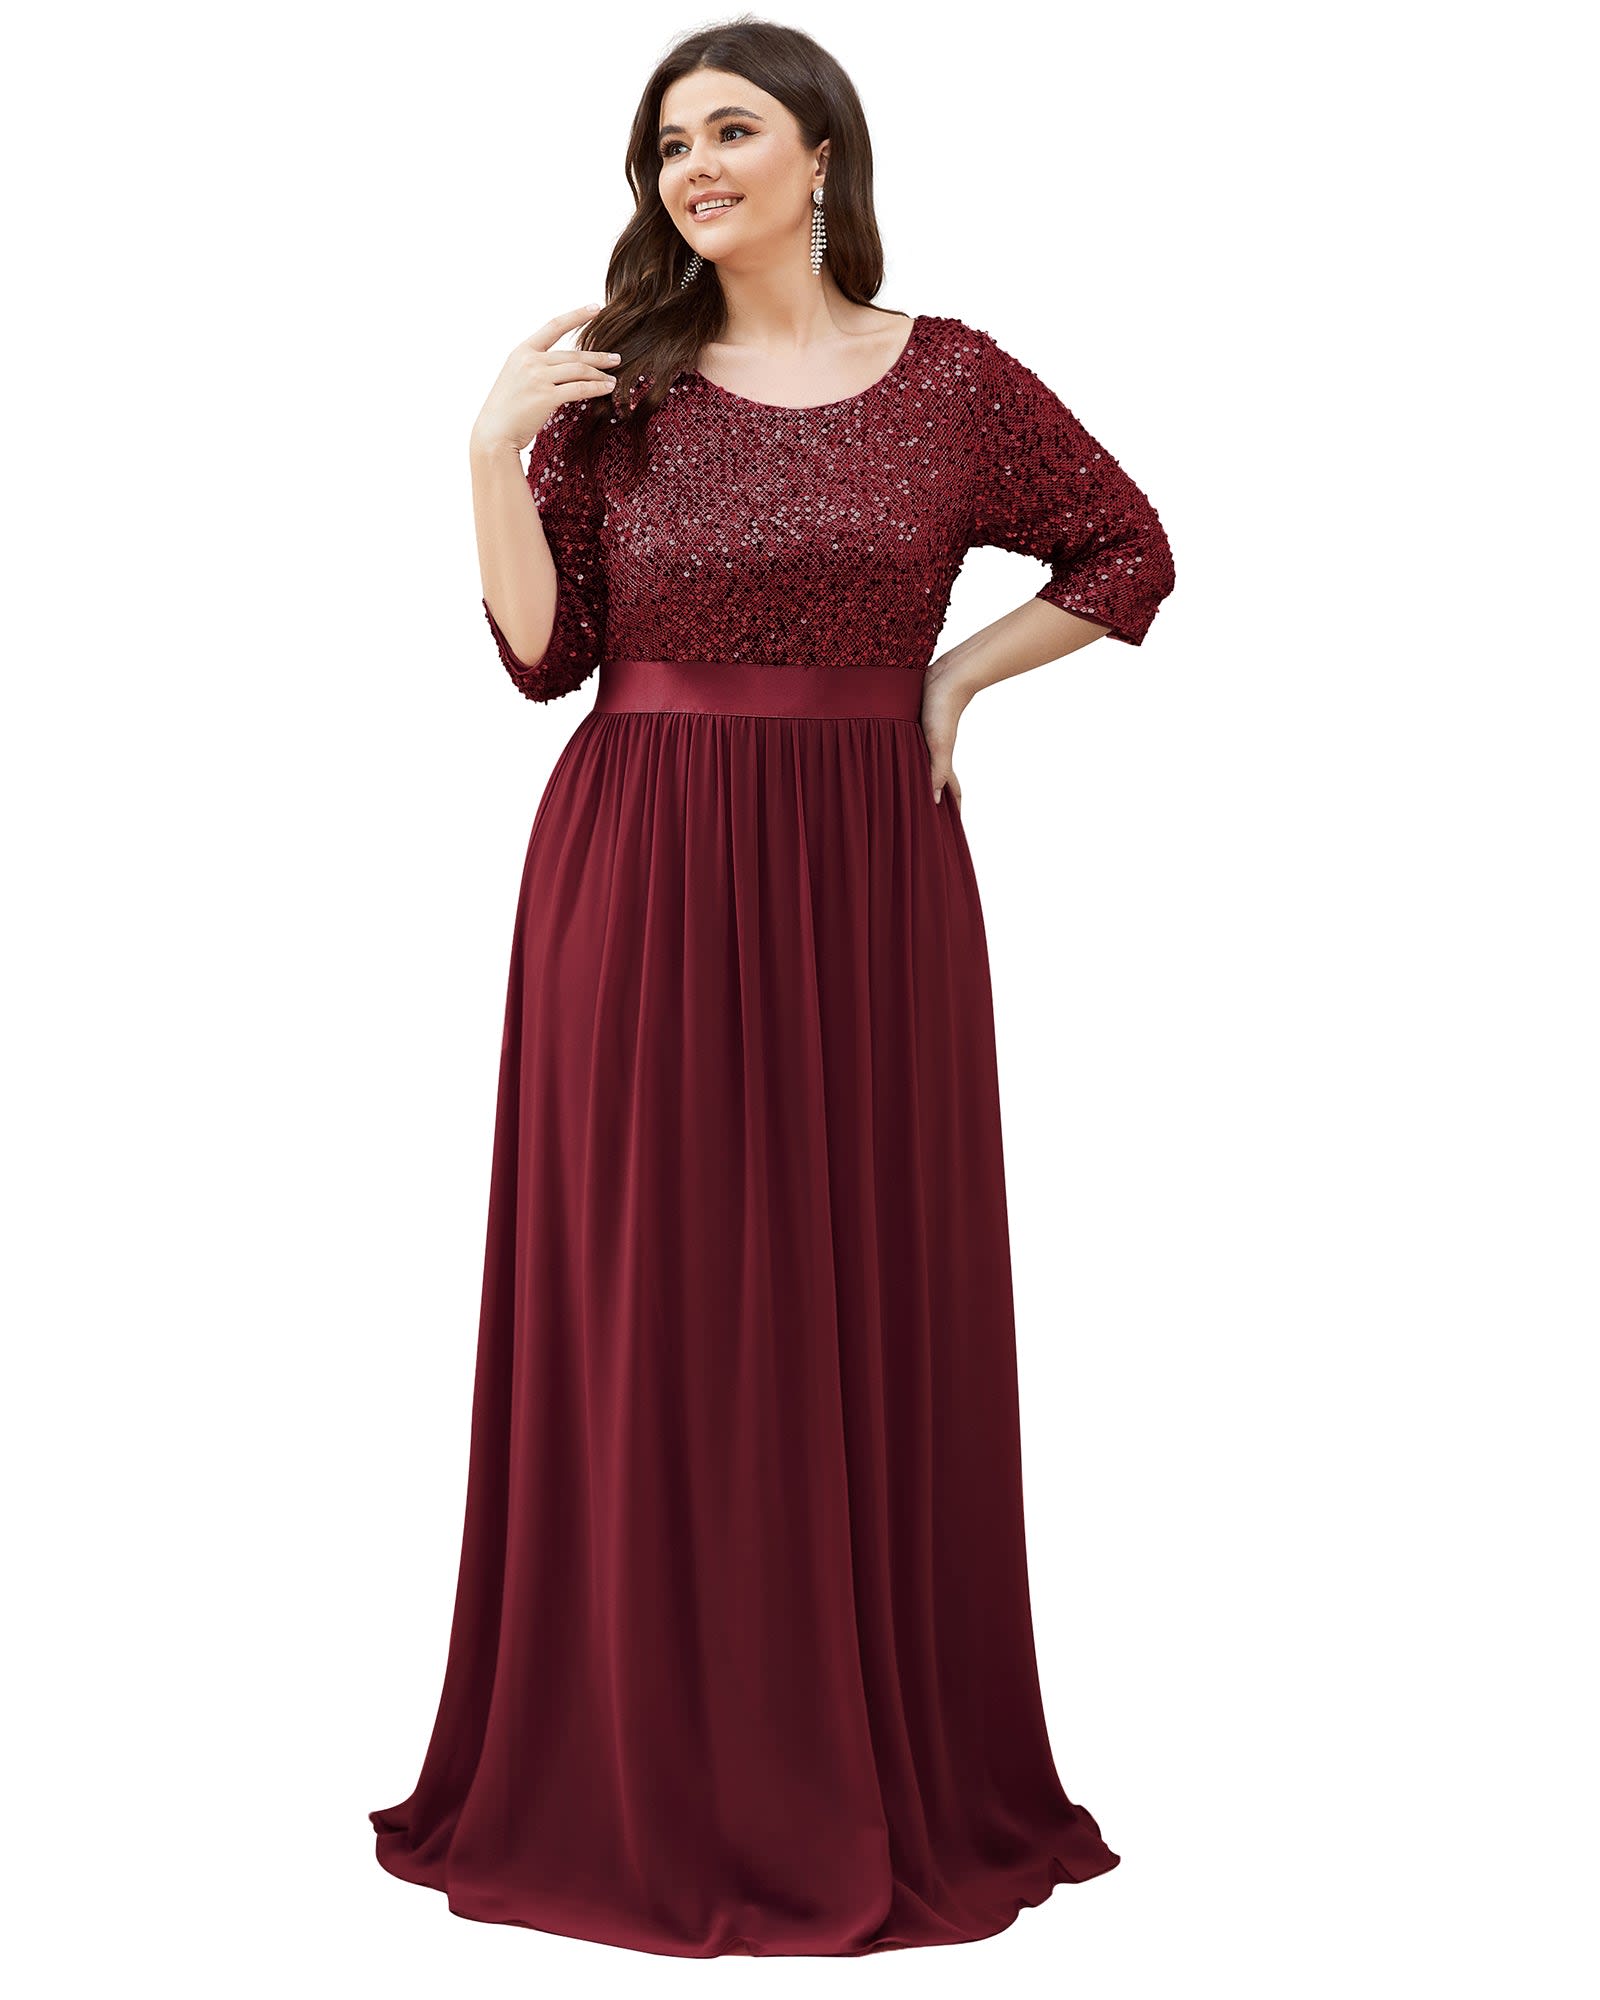 3/4 Sleeves Round Neck Evening Dress With Sequin Bodice | Burgundy